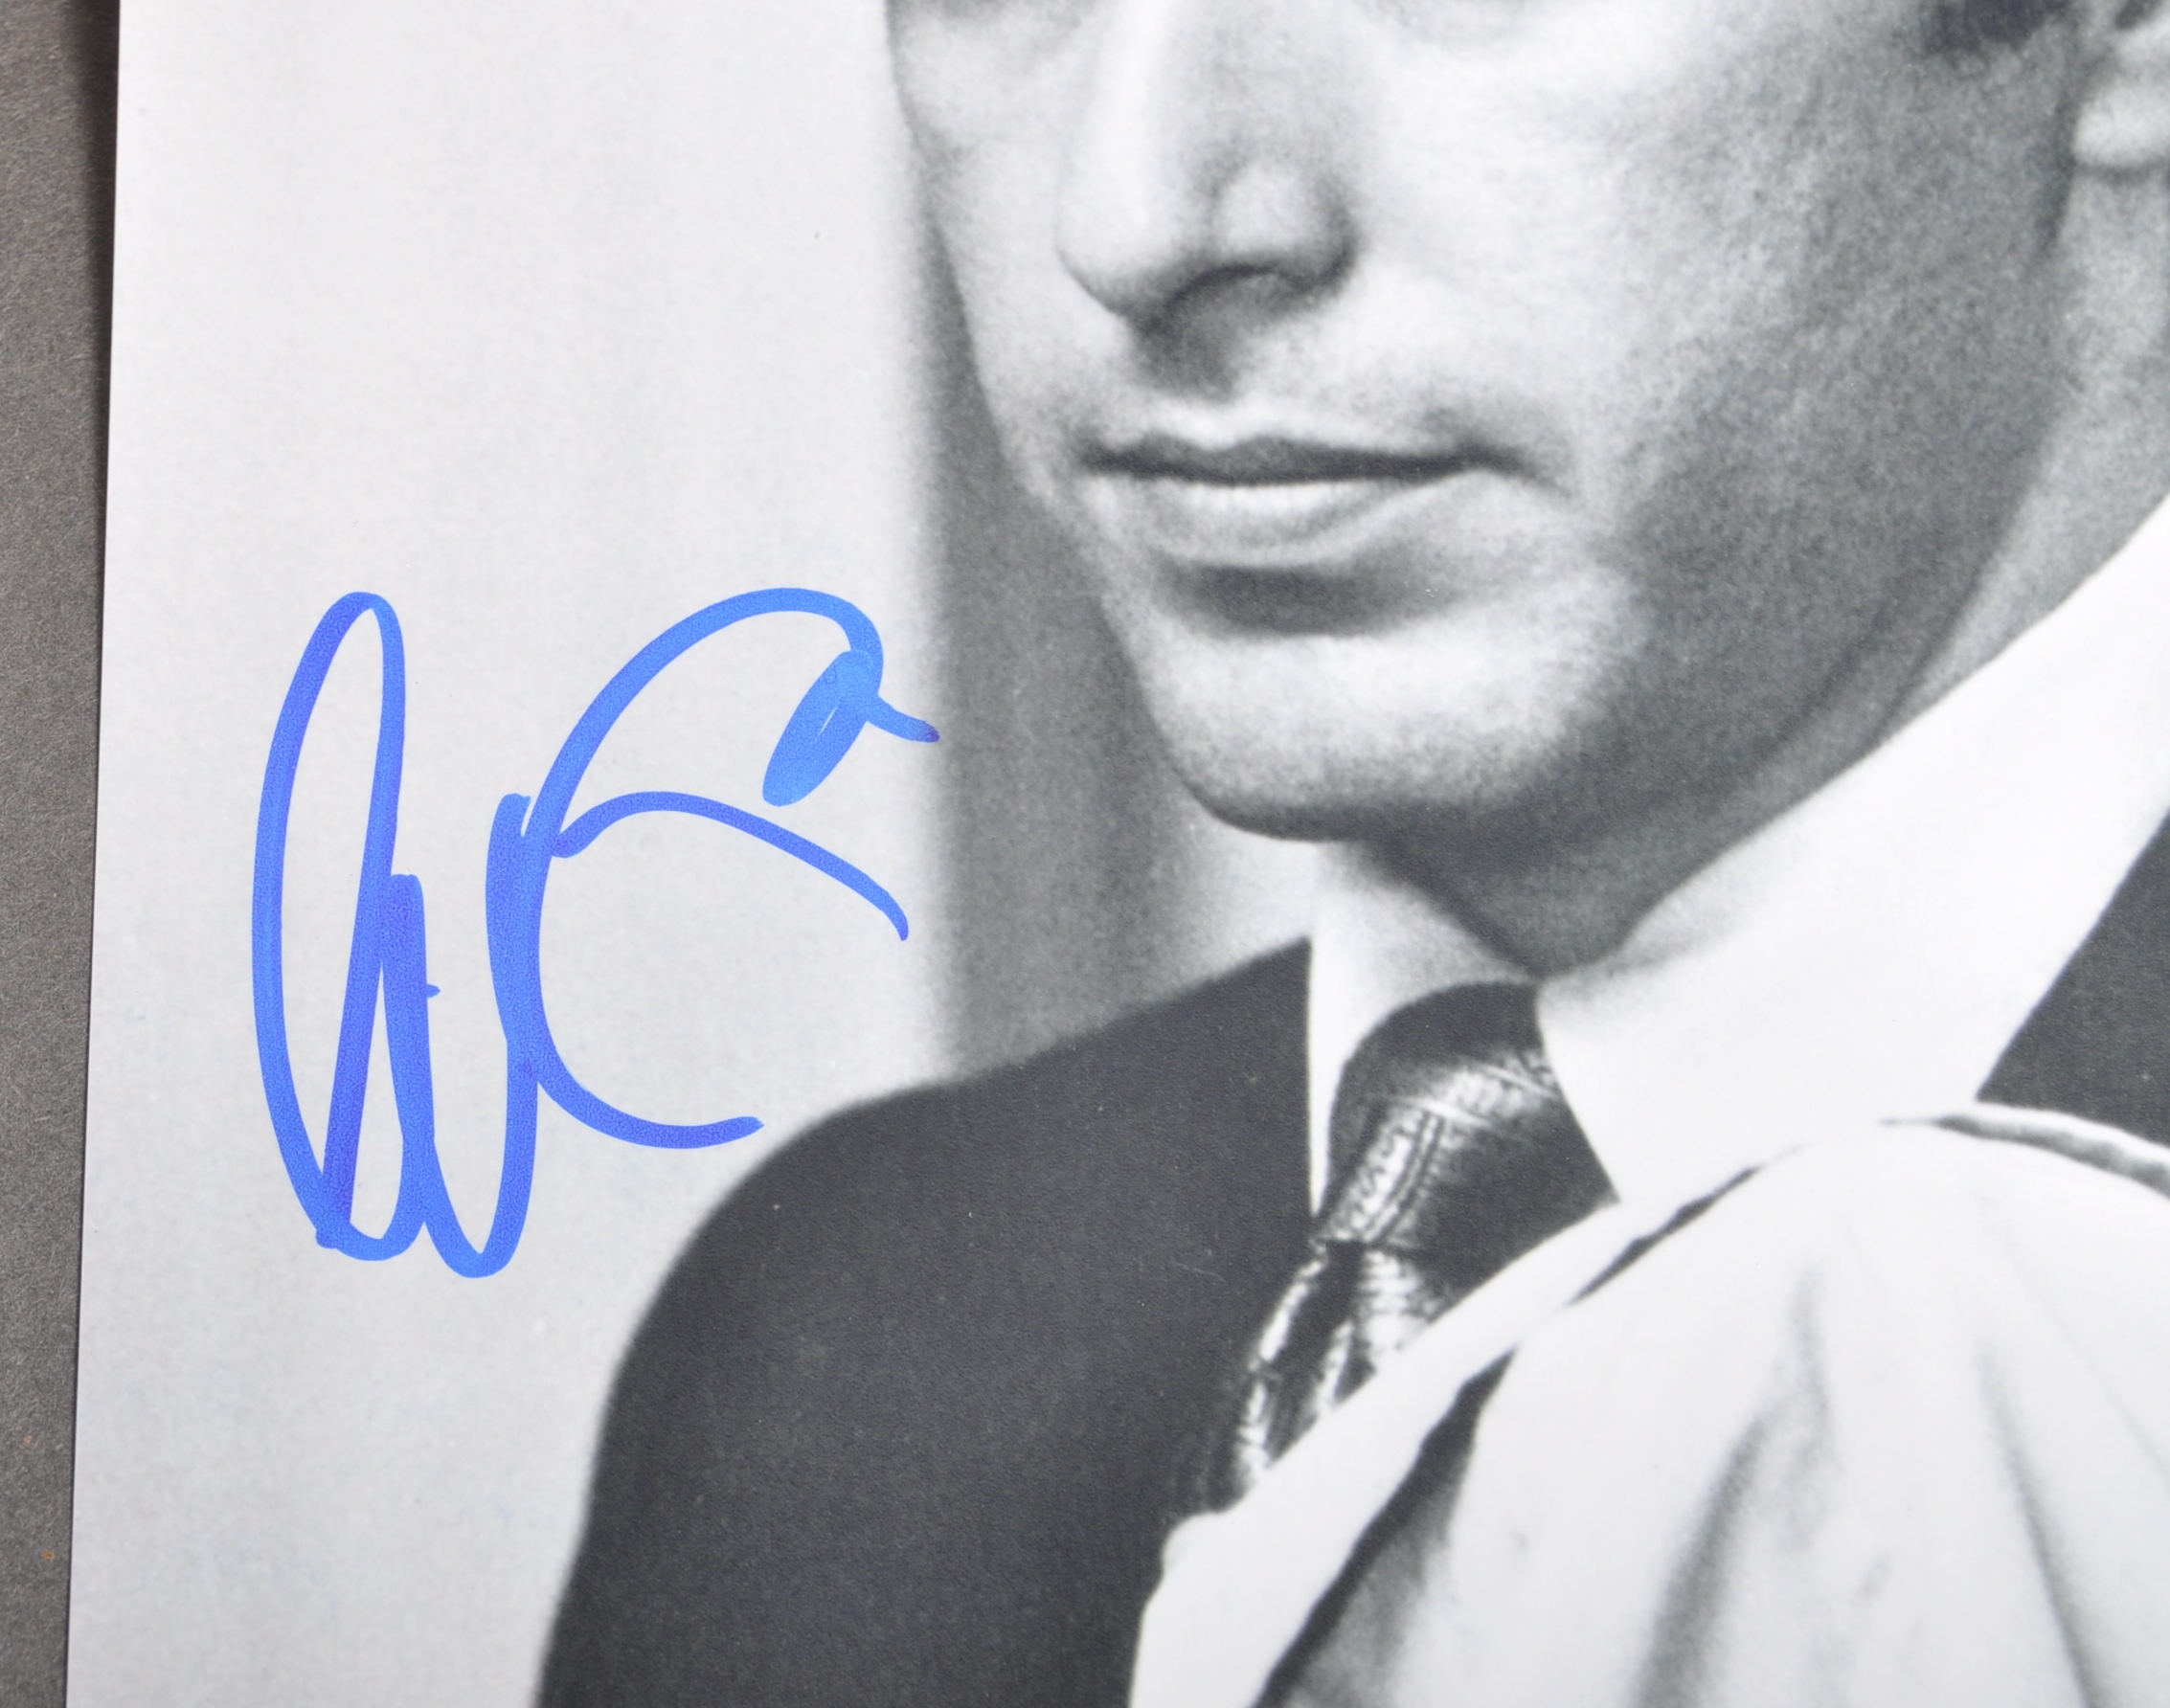 AL PACINO - THE GODFATHER - RARE AUTOGRAPHED PHOTOGRAPH BECKETT - Image 2 of 3